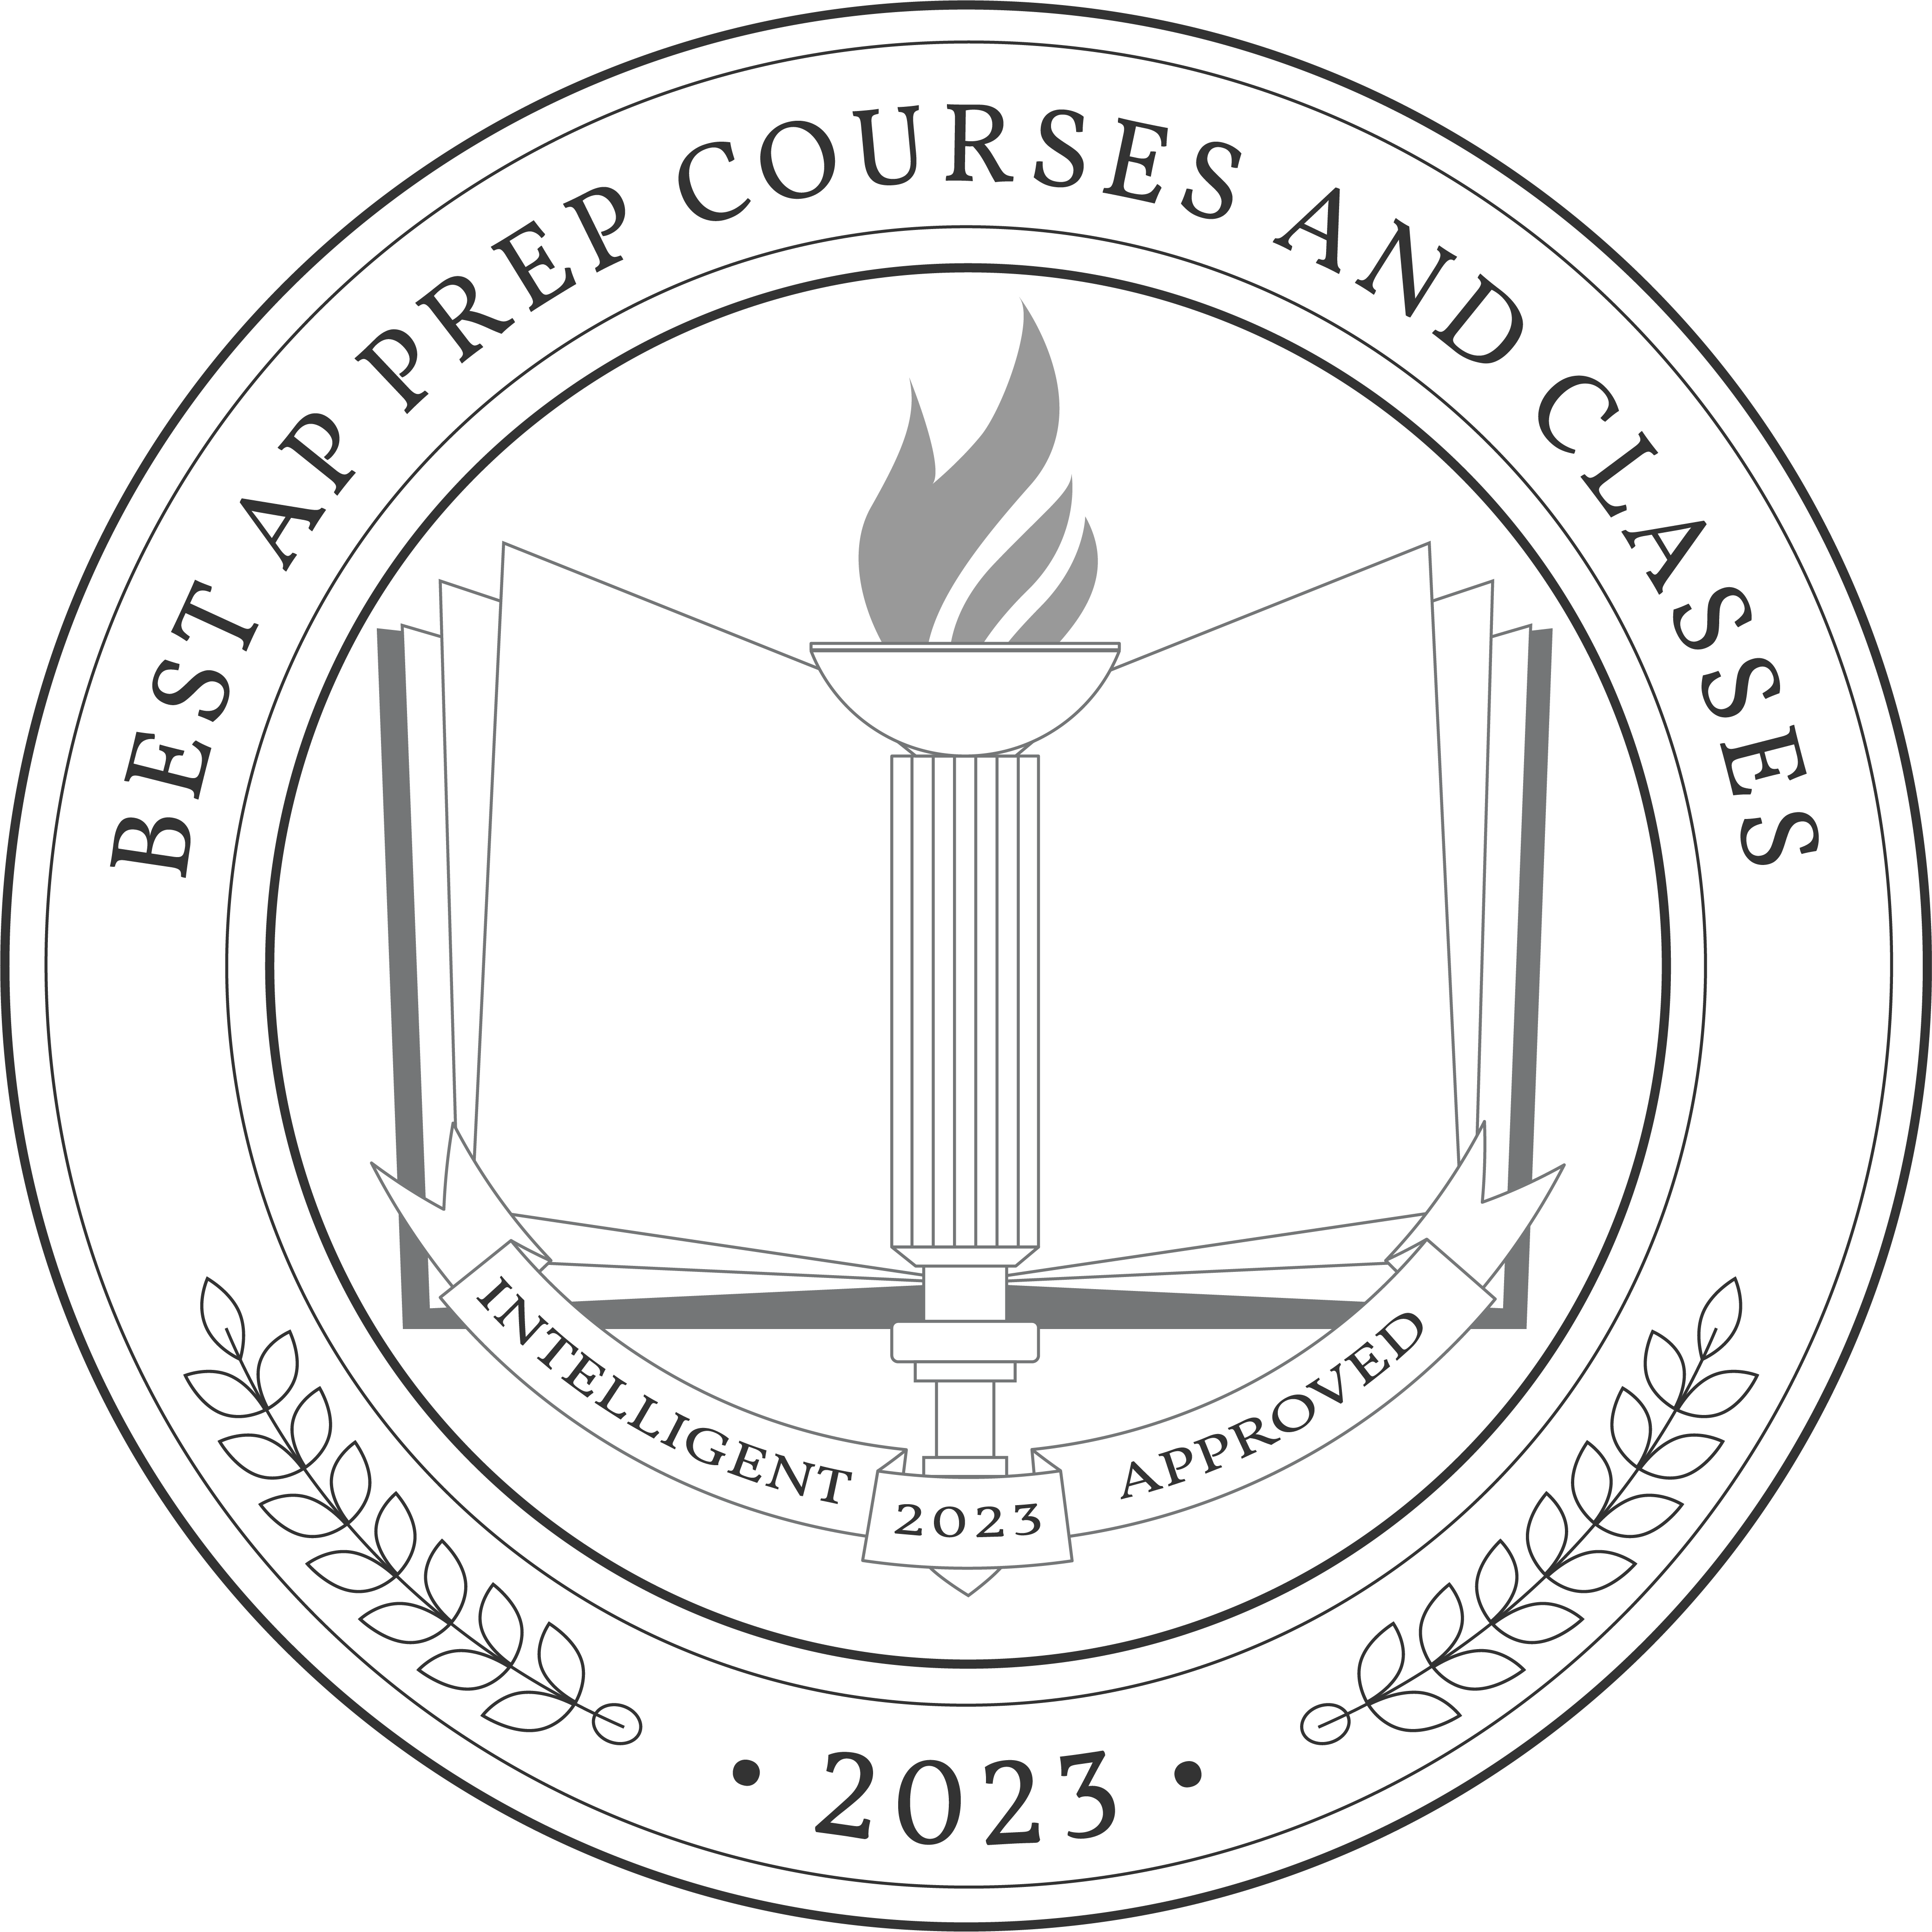 Best AP Prep Courses and Classes Badge